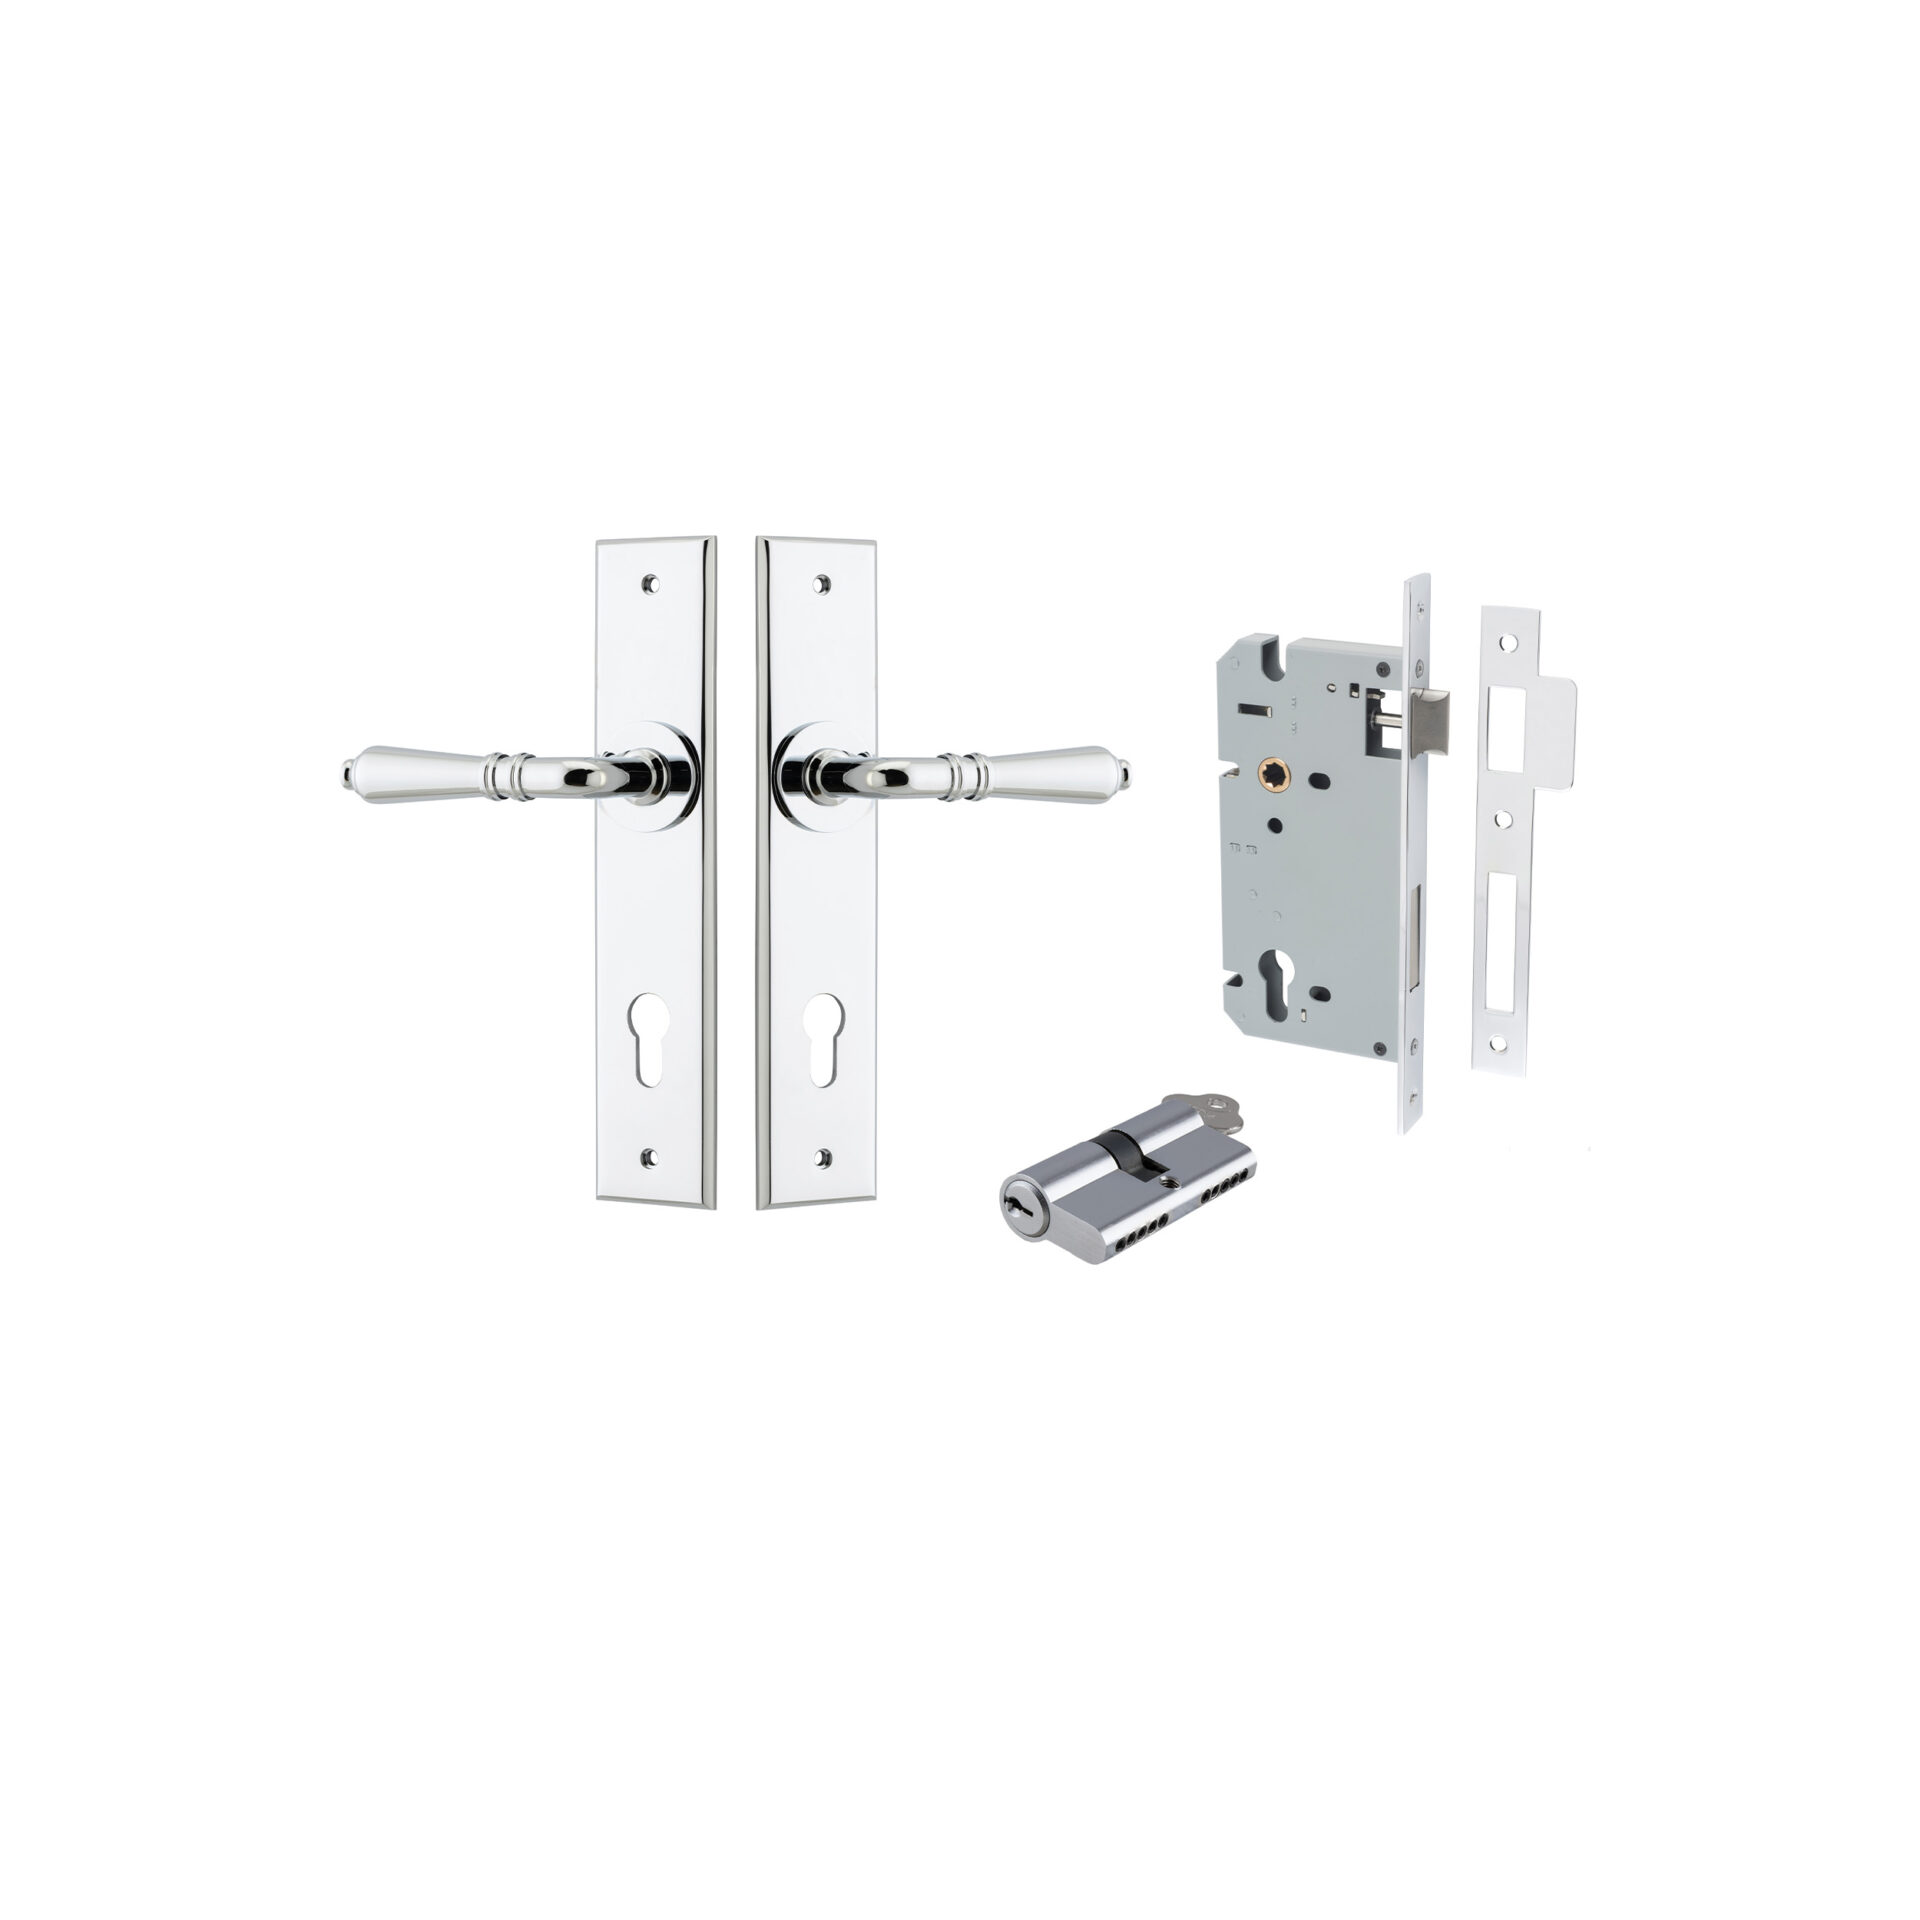 Sarlat Lever - Chamfered Backplate Entrance Kit with High Security Lock